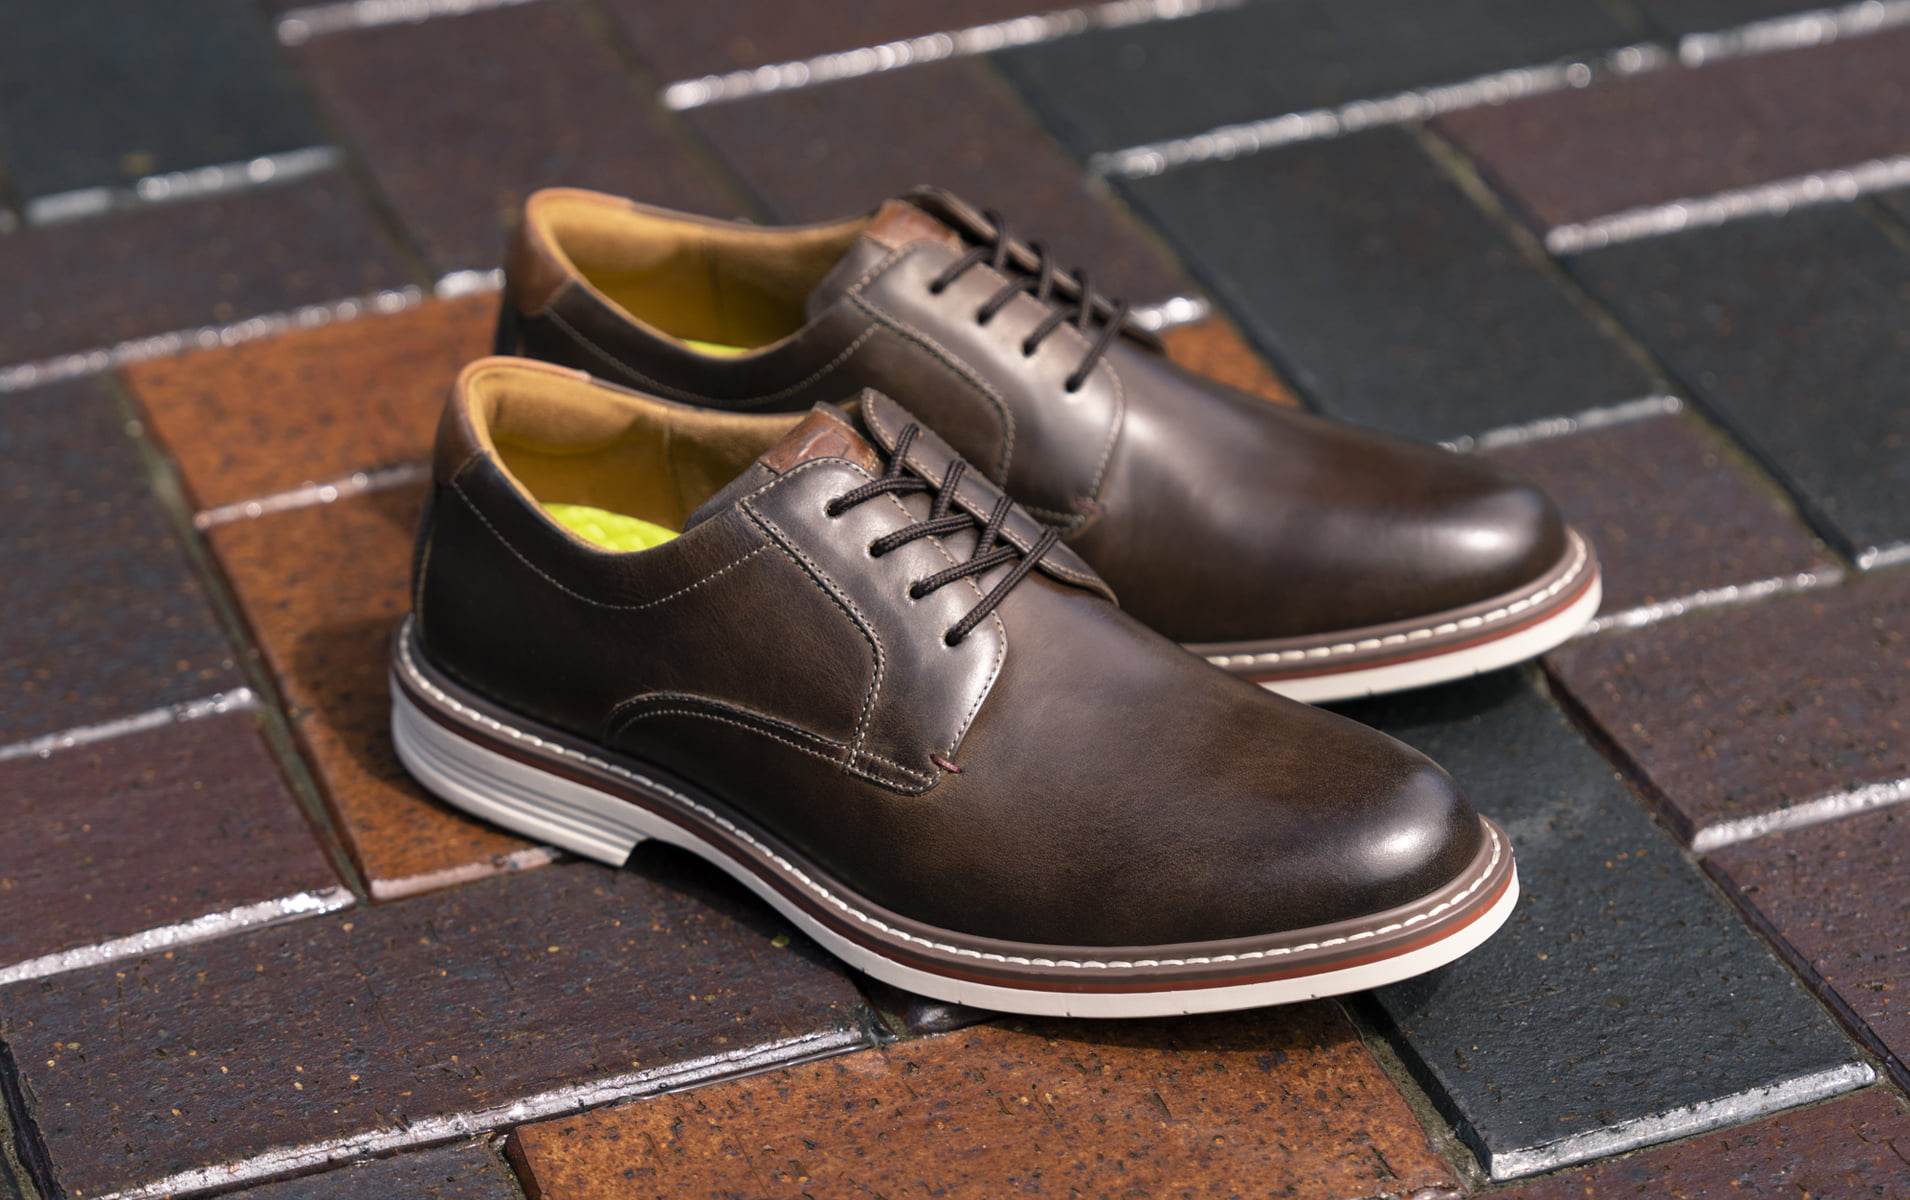 Click to shop Florsheim dress styles. Image features the Norwalk oxford.